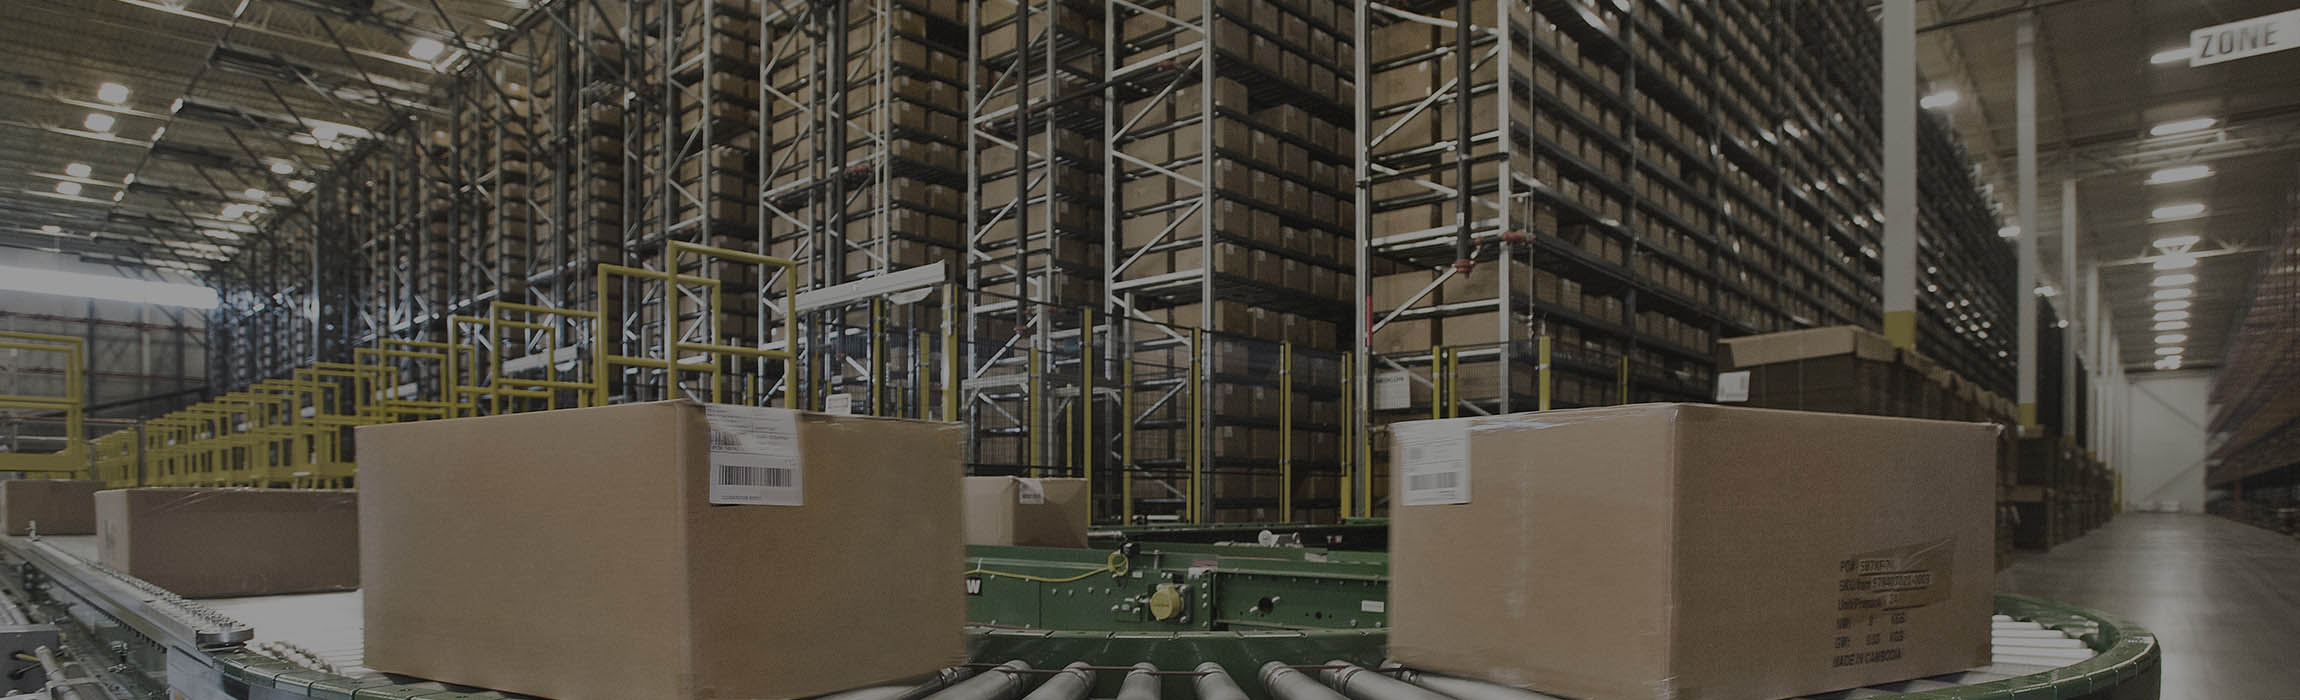 Automatic goods receipt - receiving and storage of cartons.